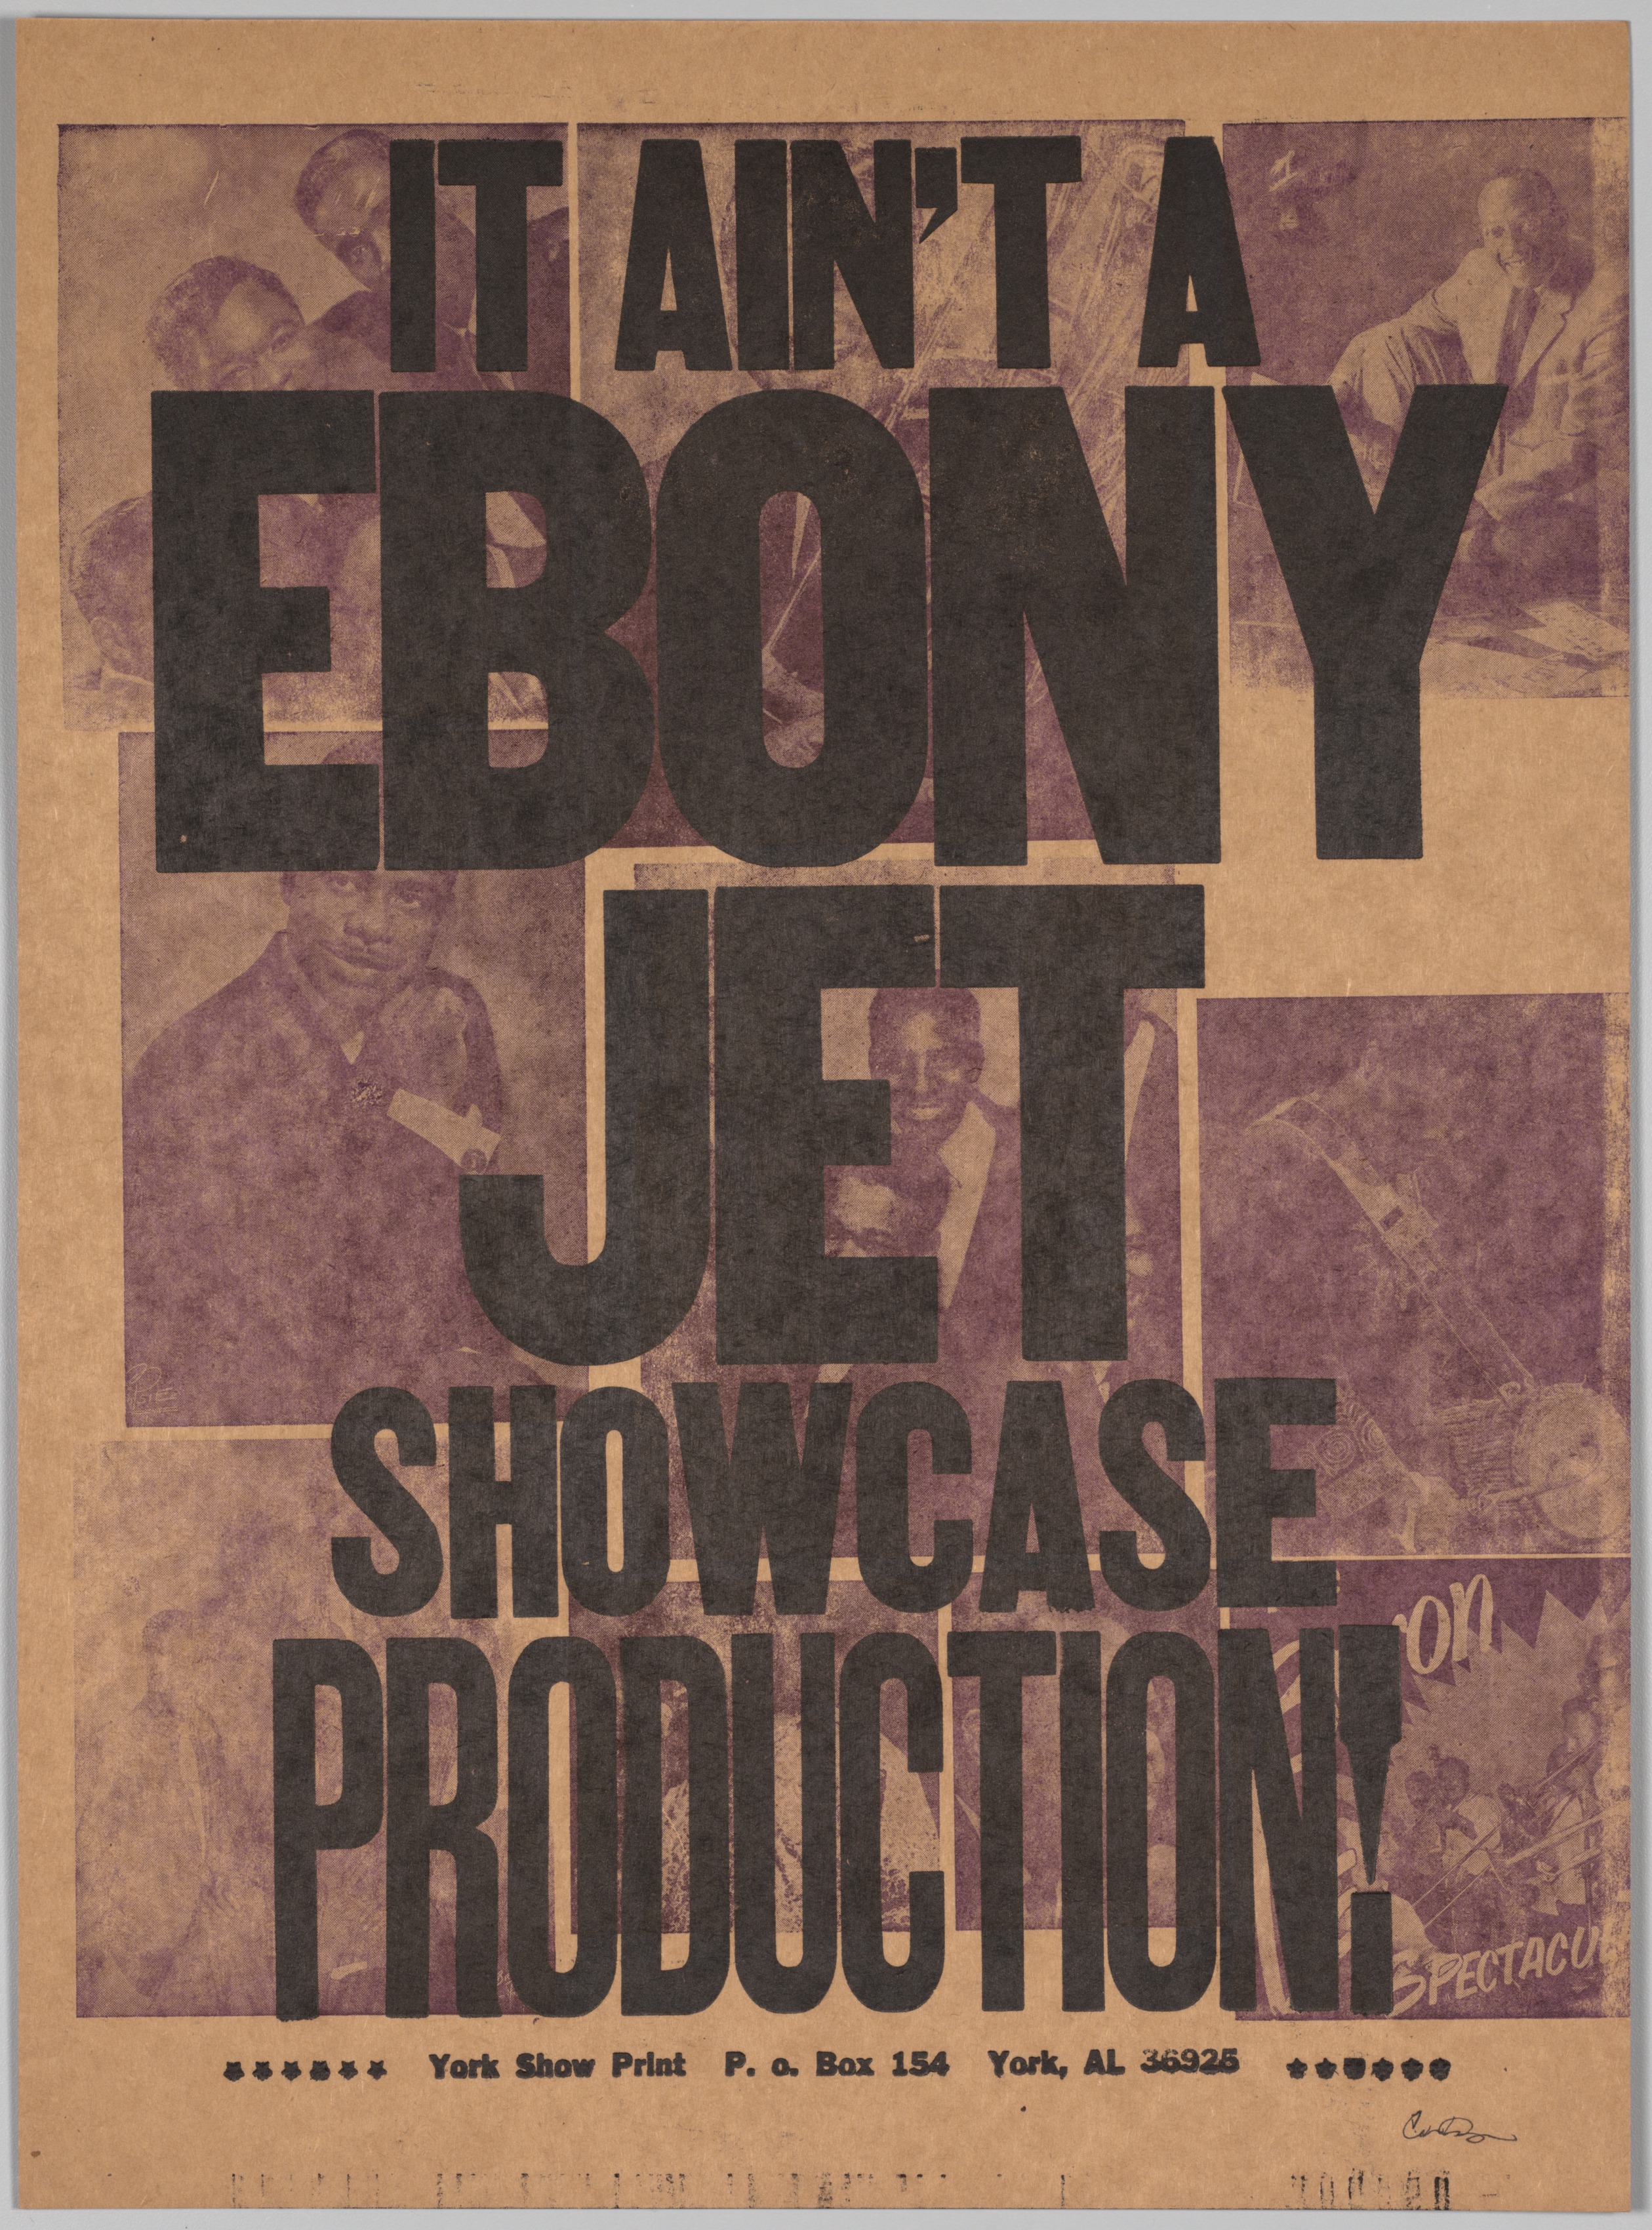 The Bad Air Smelled of Roses: It Ain’t A Ebony Jet Showcase Production!